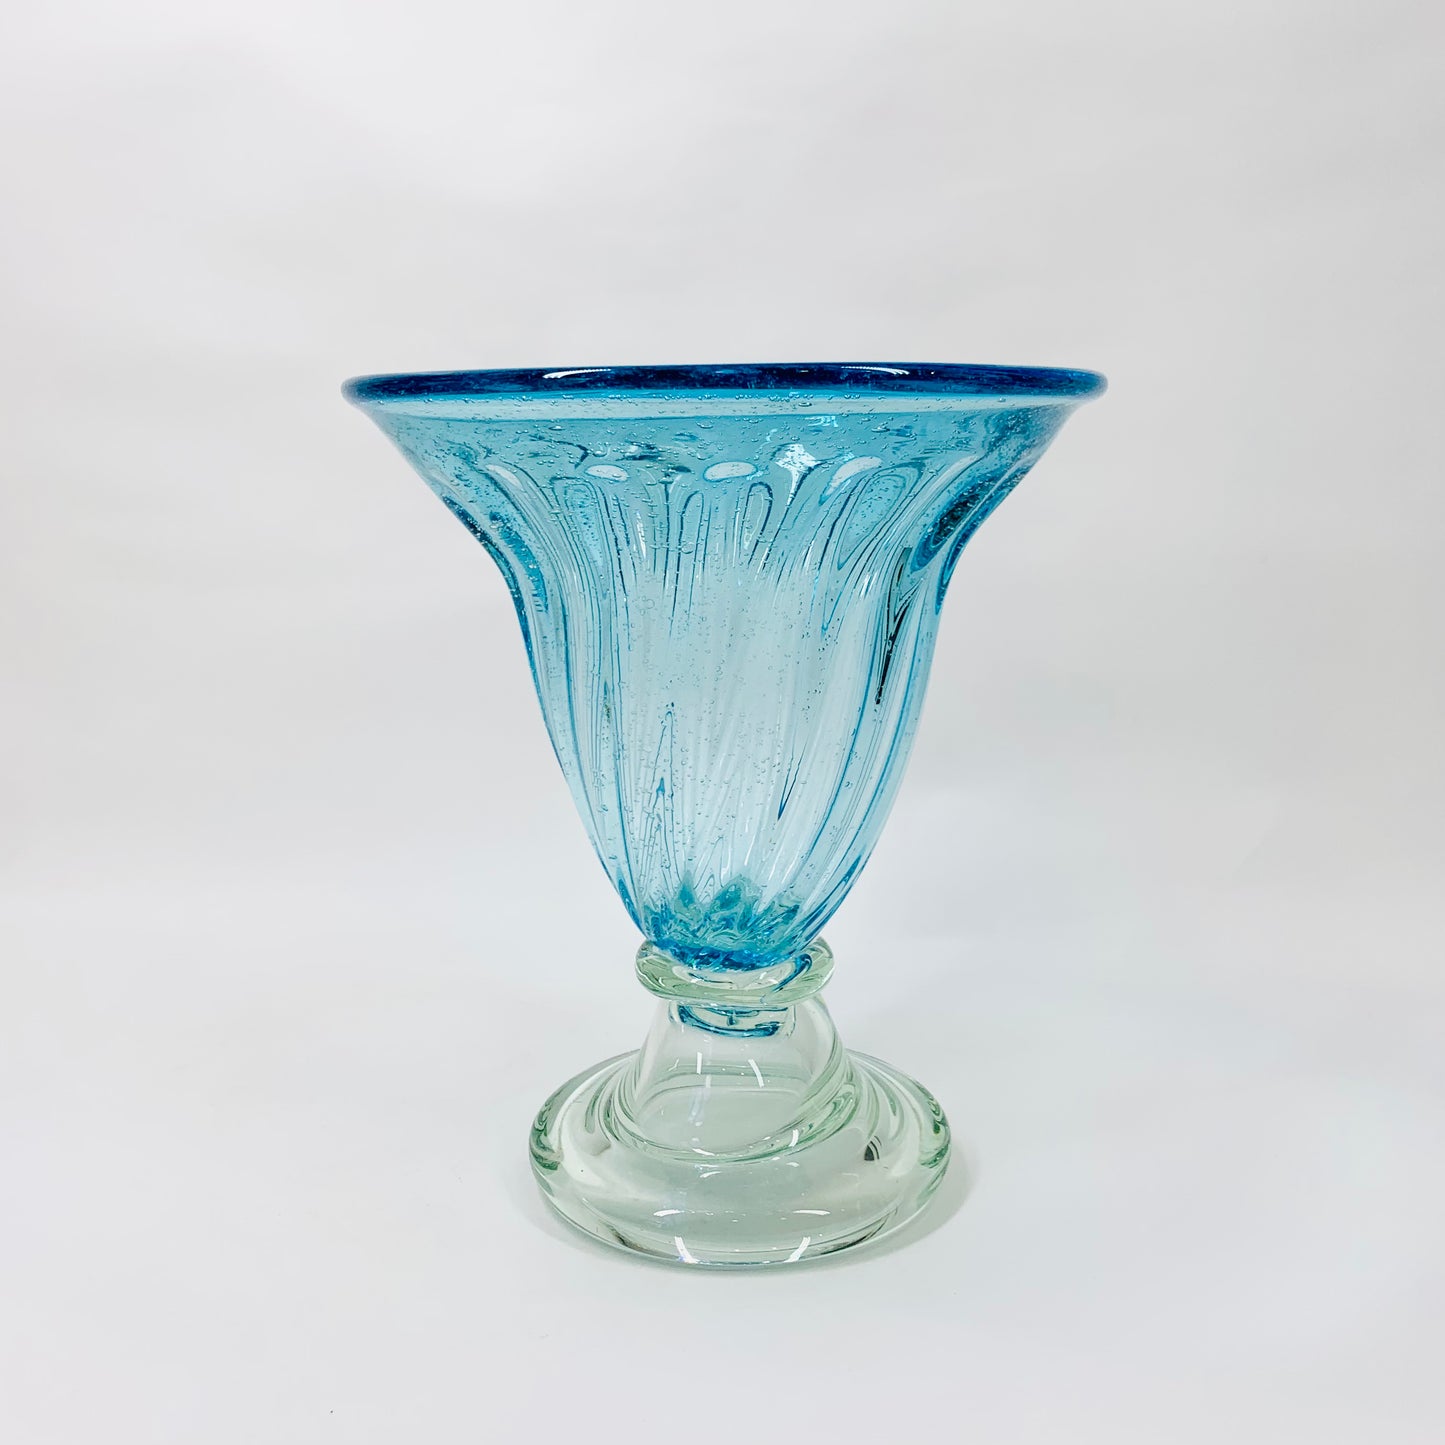 Midcentury mouth blown blue footed glass vase with controlled bubbles